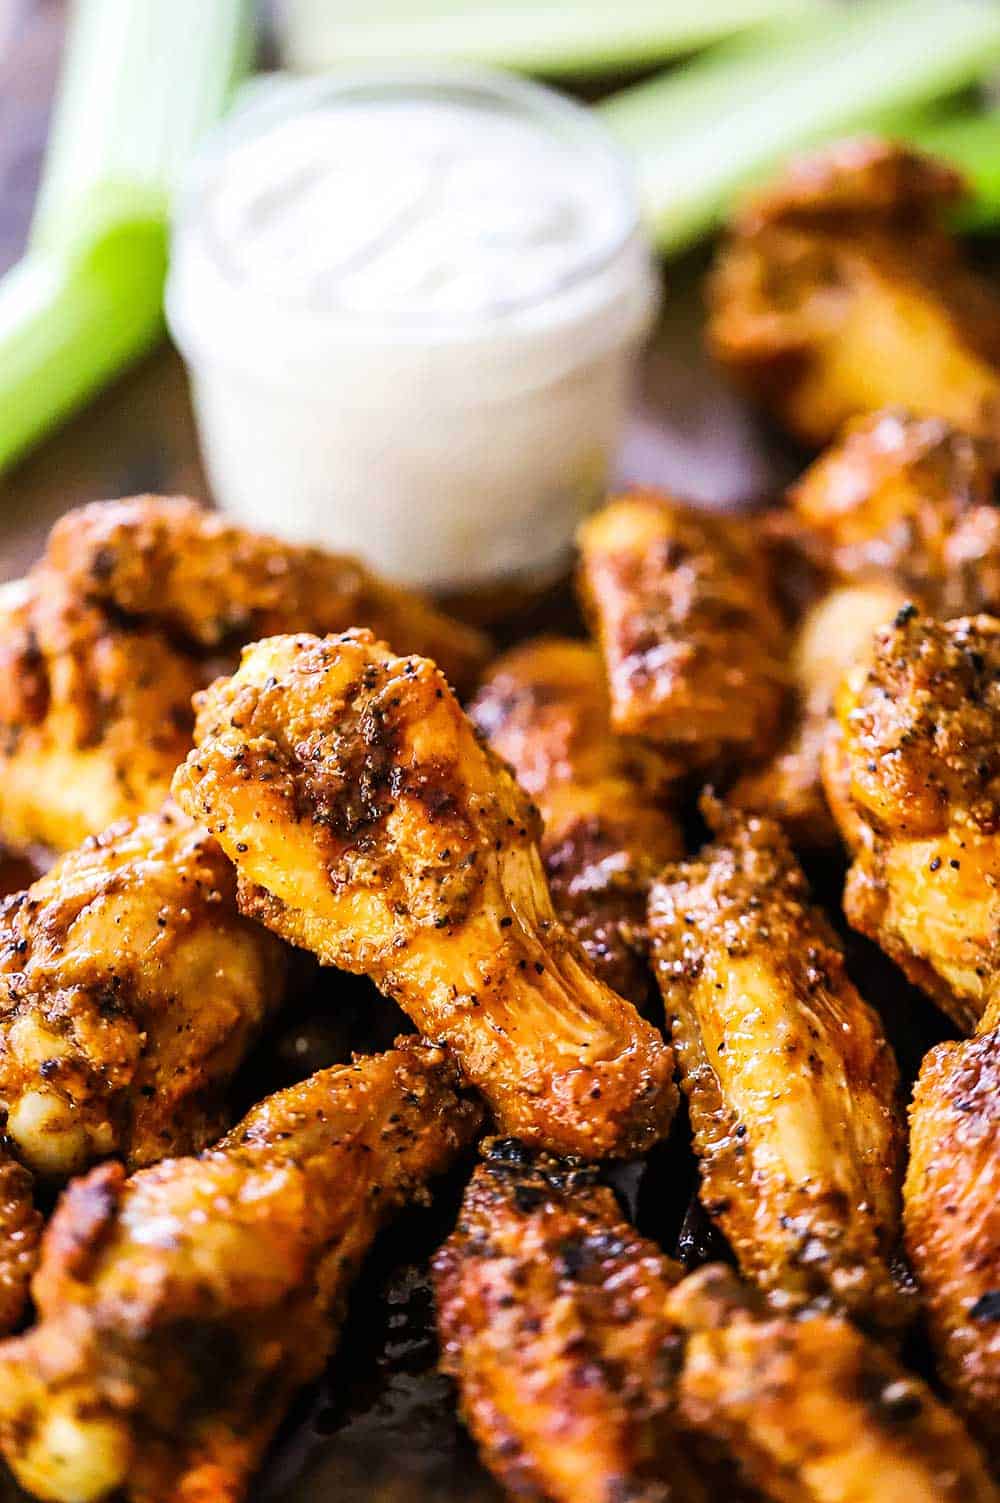 A close-up view of grilled chicken wings with buffalo sauce piled high next to a jar of blue cheese dressing.